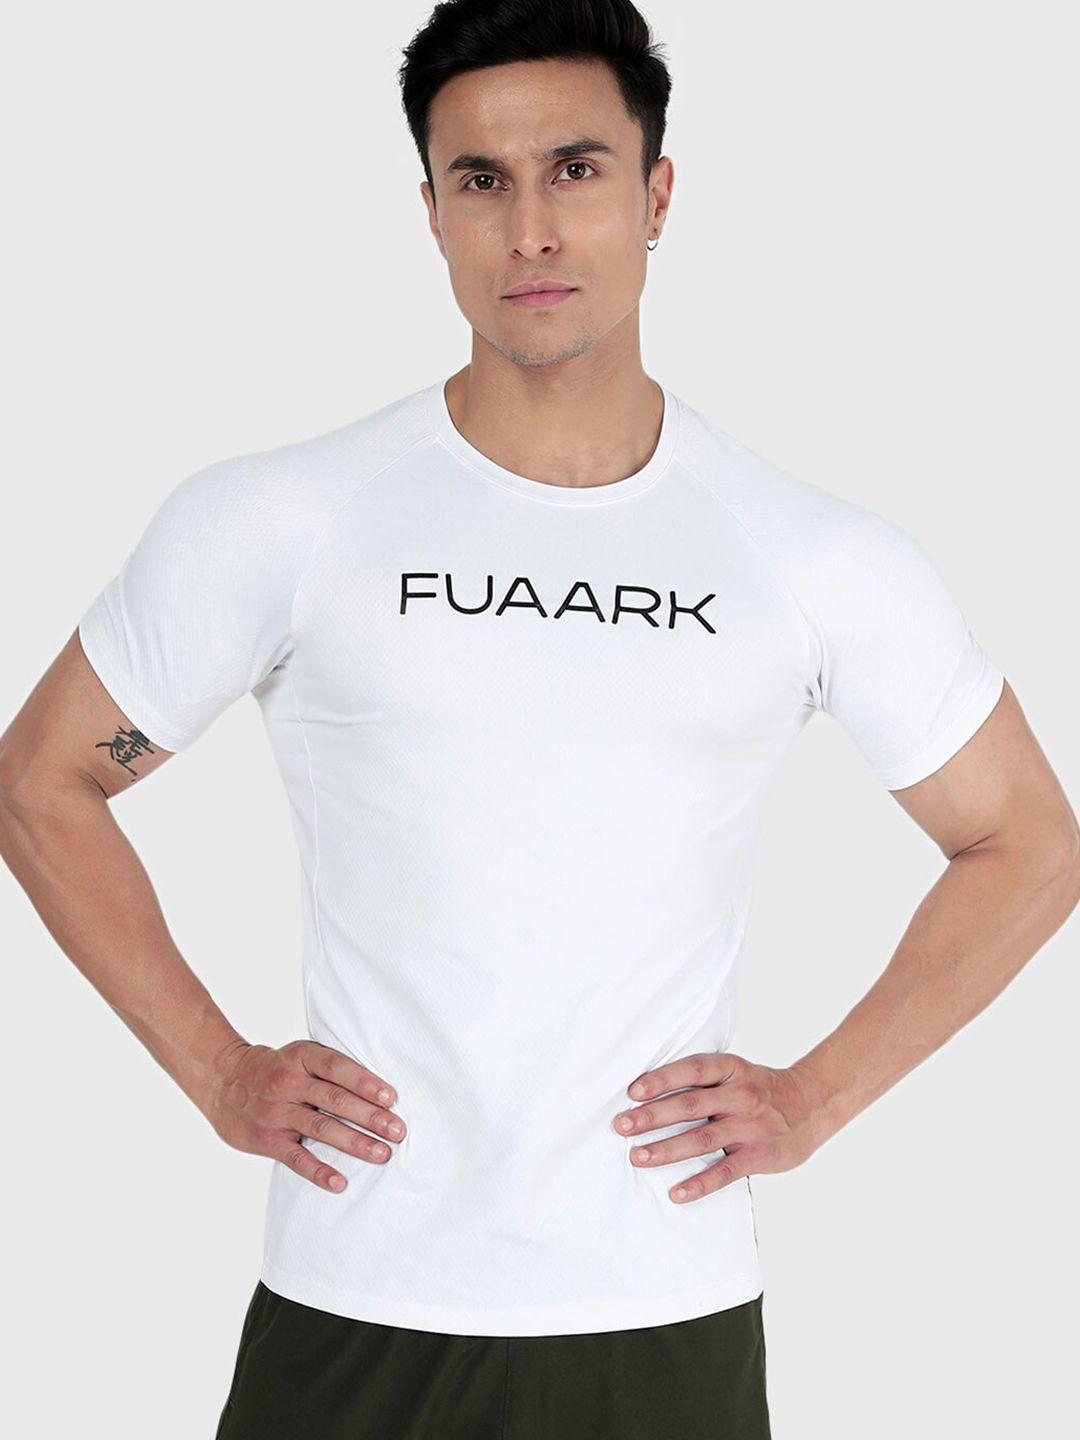 fuaark typography printed anti odour sport t-shirt